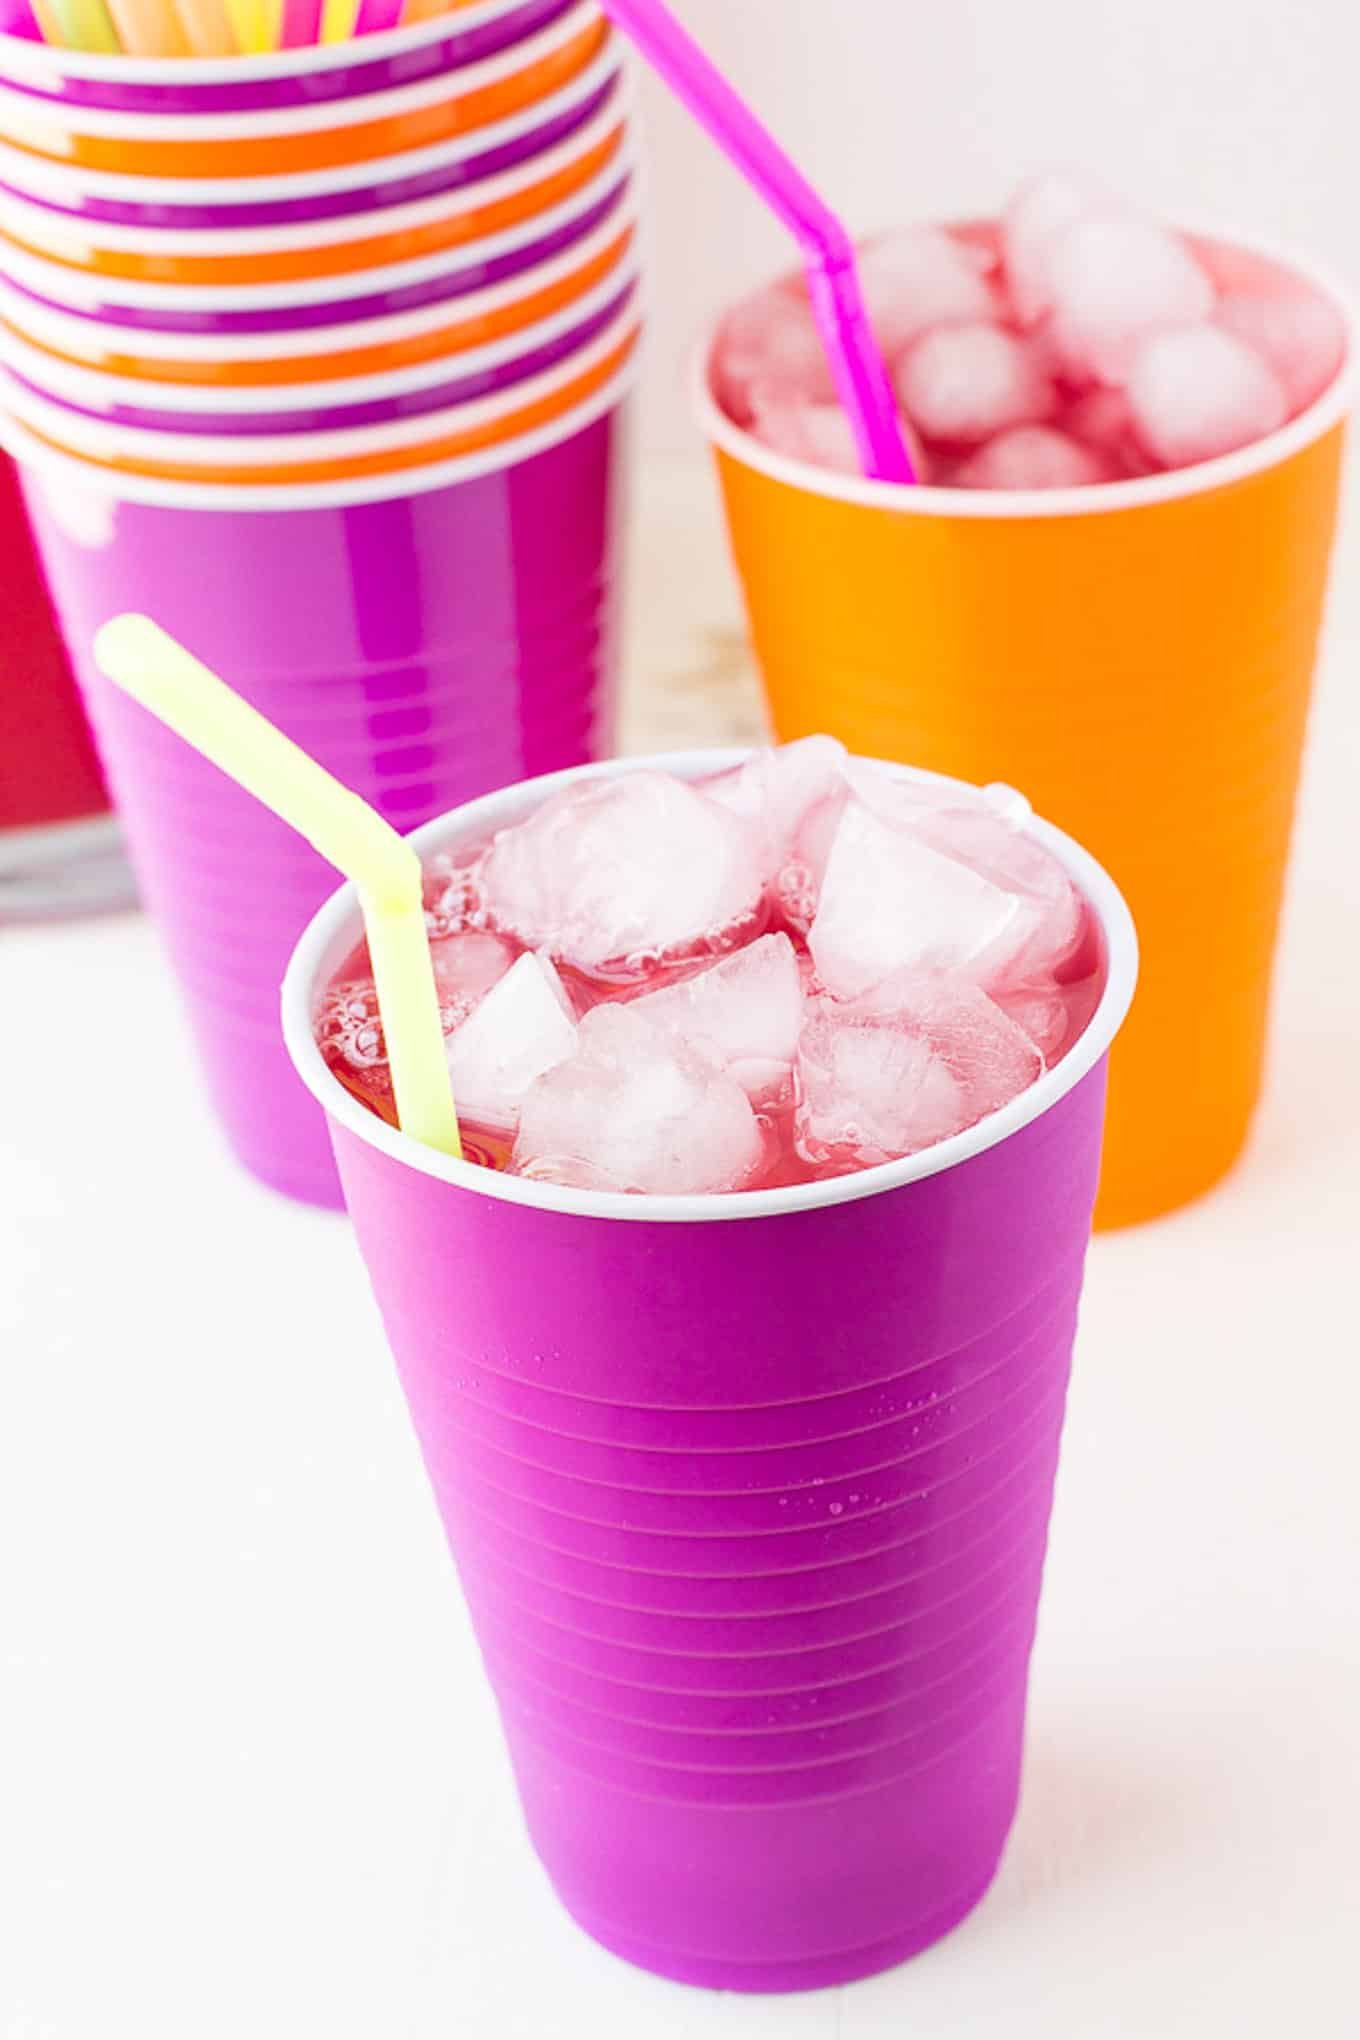 Way to Celebrate! Party Tub - Pink - 1 Each